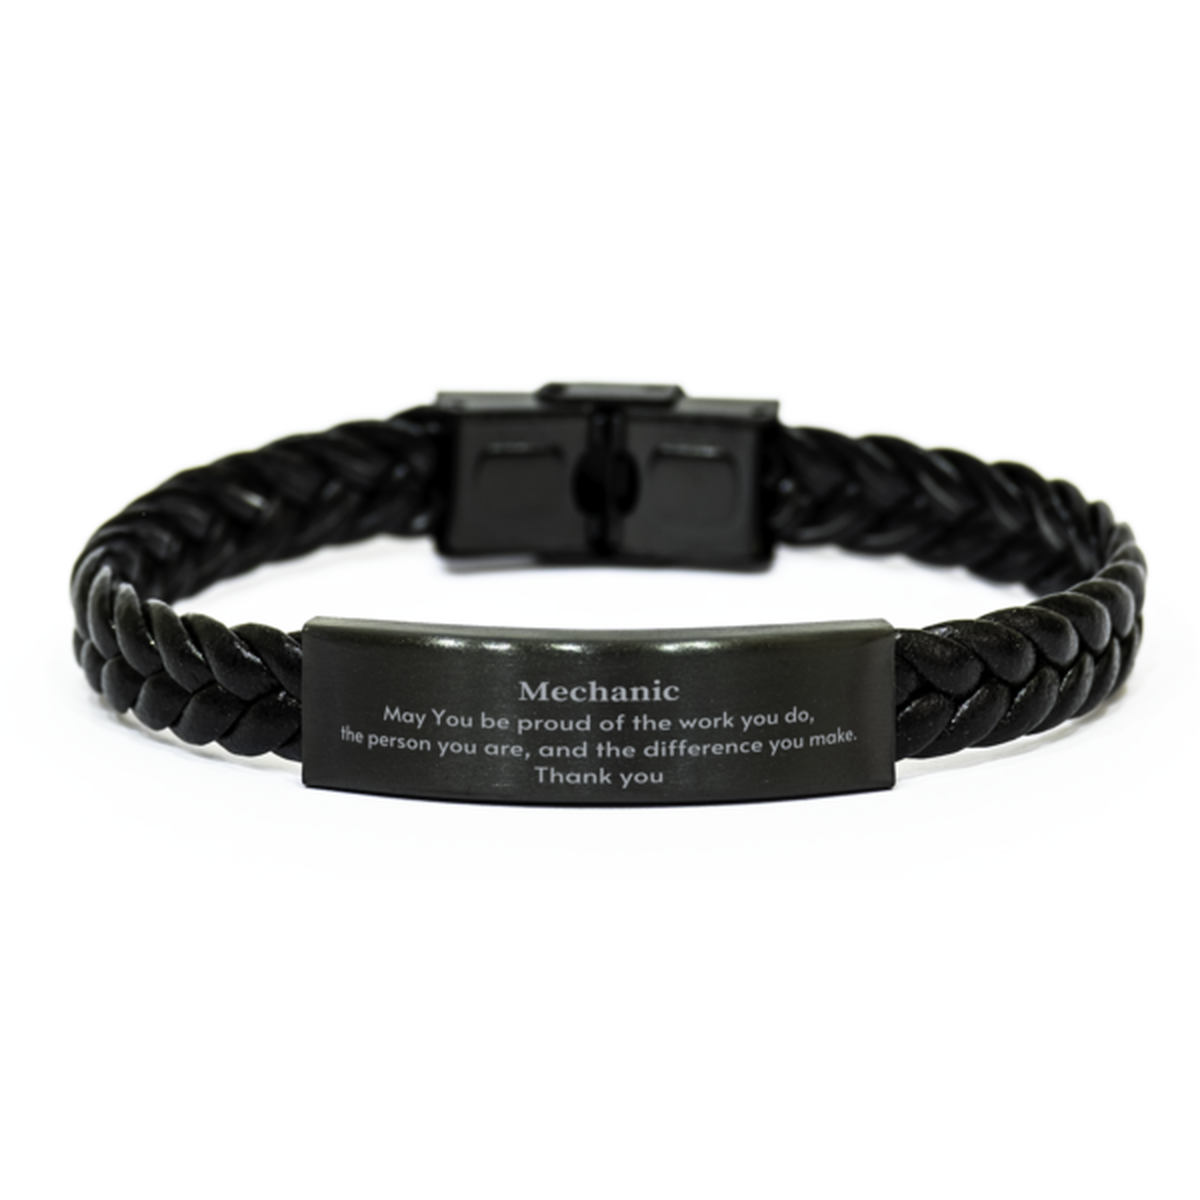 Heartwarming Braided Leather Bracelet Retirement Coworkers Gifts for Mechanic, Mechanic May You be proud of the work you do, the person you are Gifts for Boss Men Women Friends